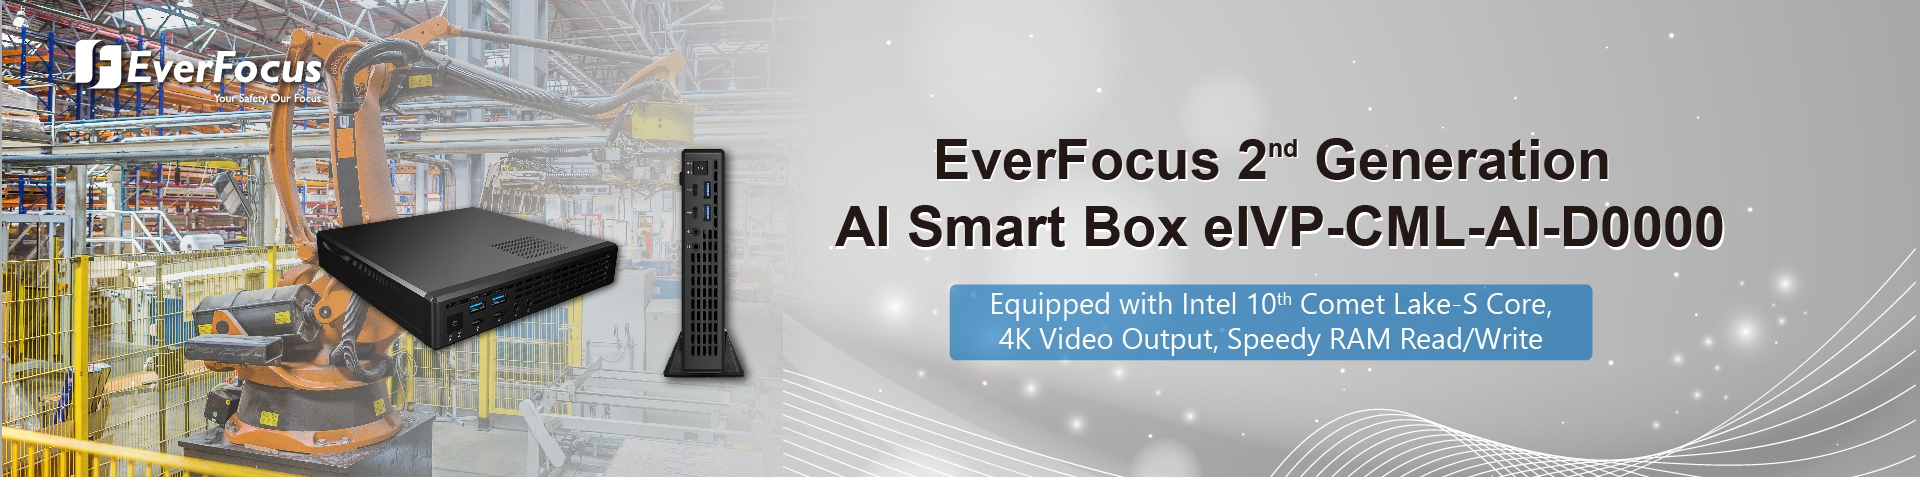 A Light Step toward AIoT with eIVP-CML-AI-D0000: EverFocus Launches Its Compact 2nd Generation AI Smart Box